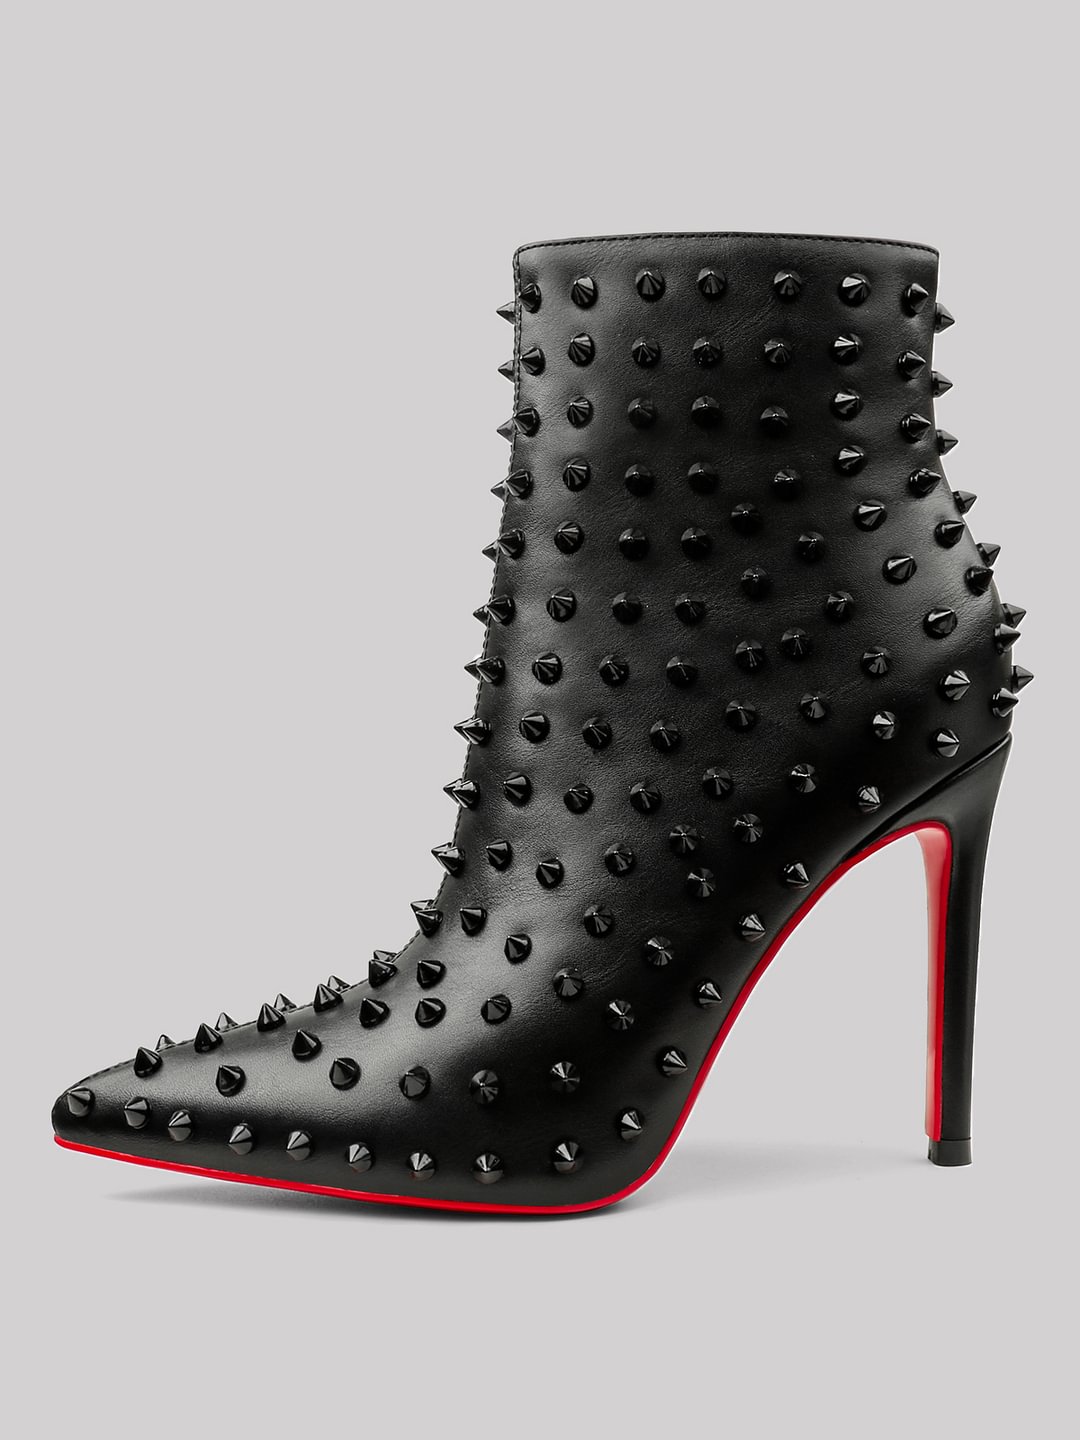 3.94"/4.72" Women's Ankle Boots with Rivets Closed Pointed Toe Stilettos Boots